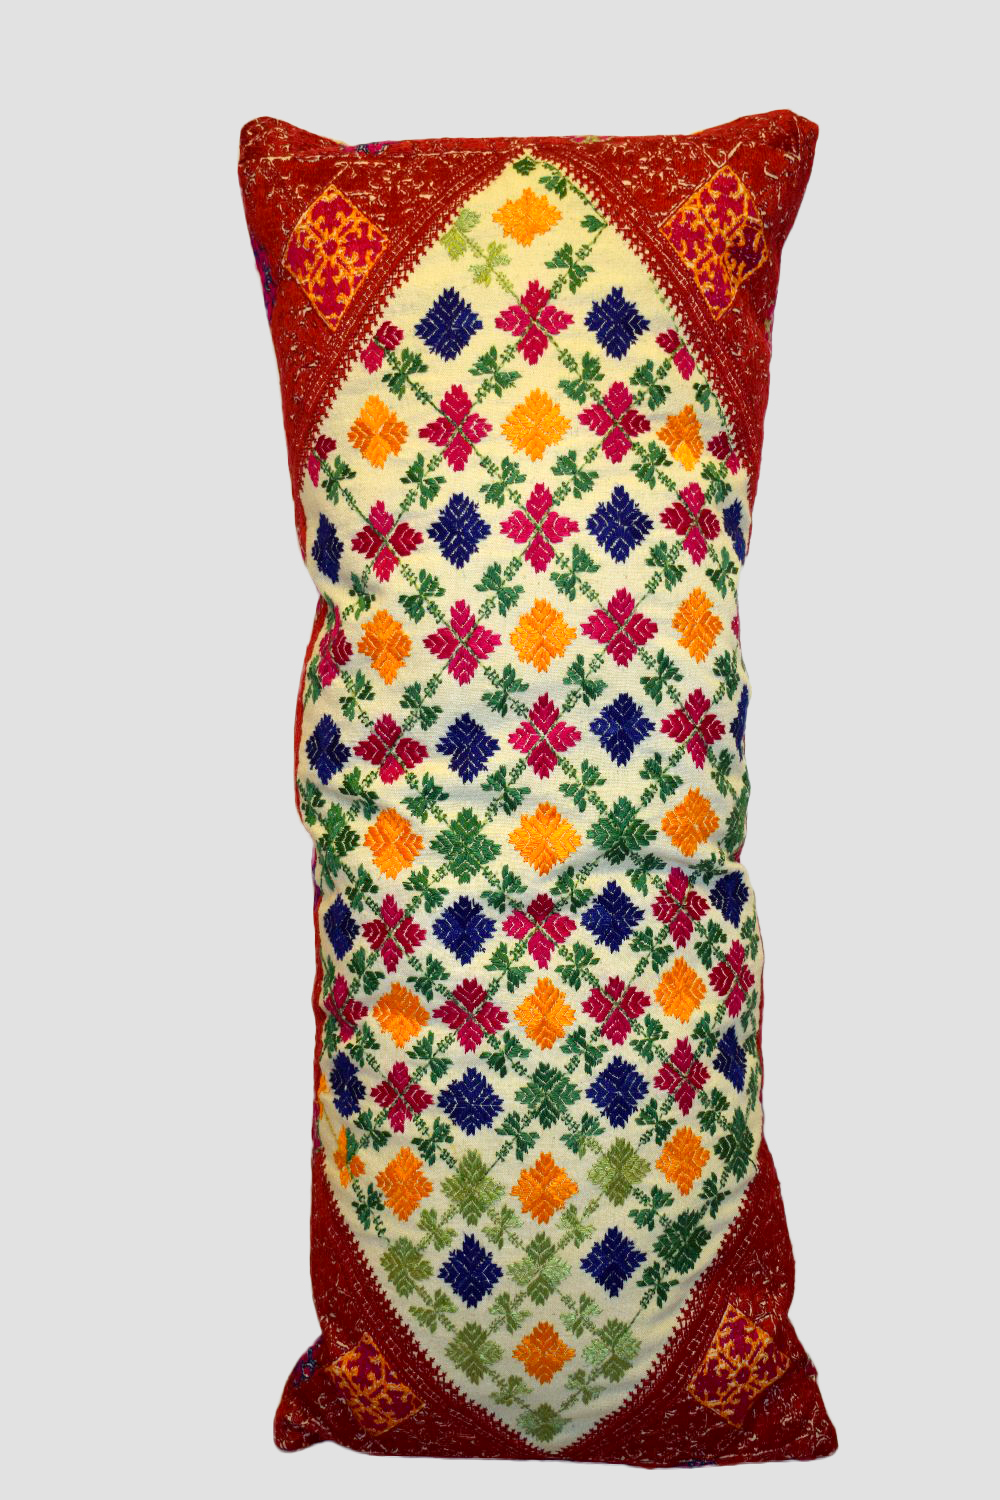 Swat Valley floss silk embroidered bolster, Pakistan, second half 20th century, 31in. X 13in.